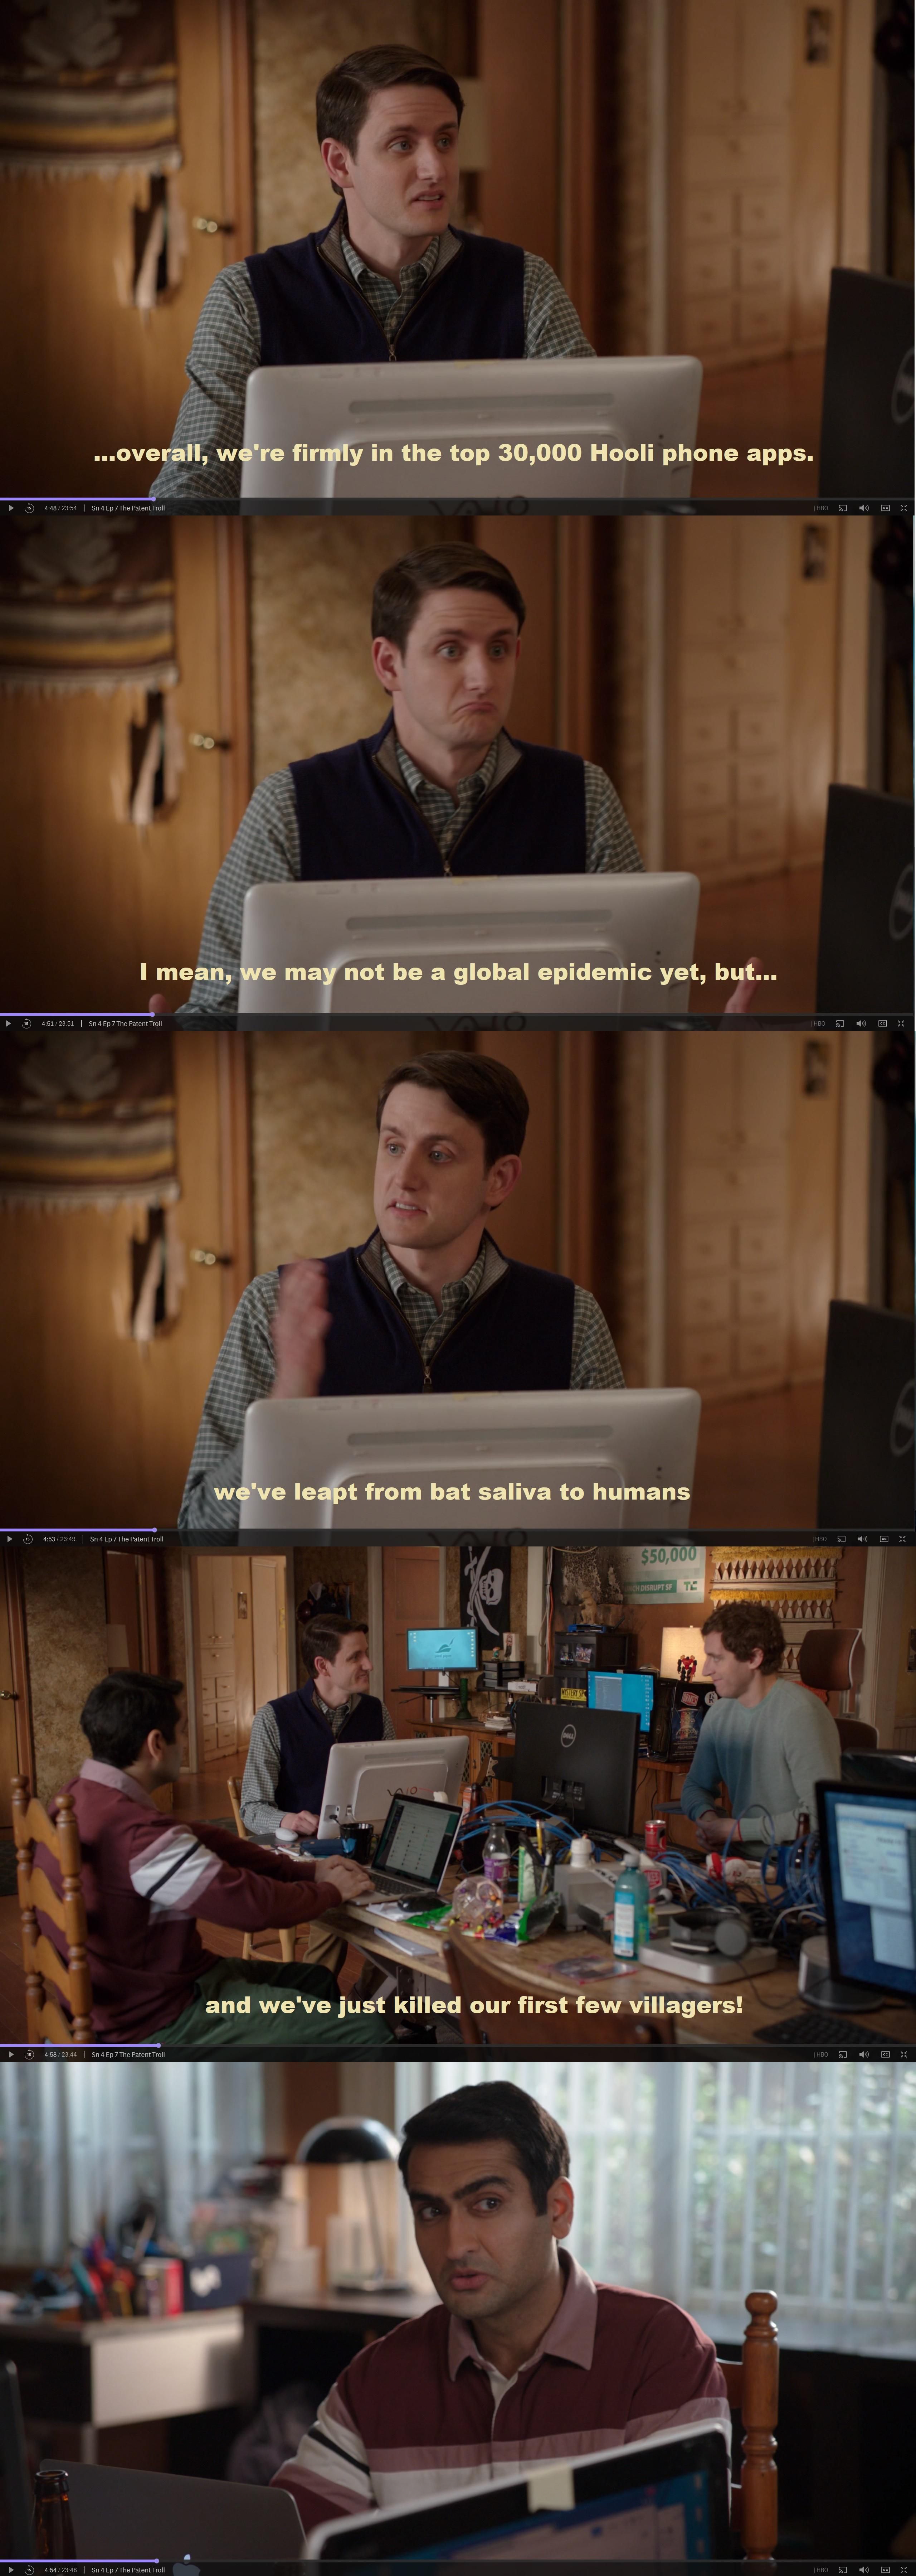 This "Silicon Valley" scene from 2017 is even funnier in 2020